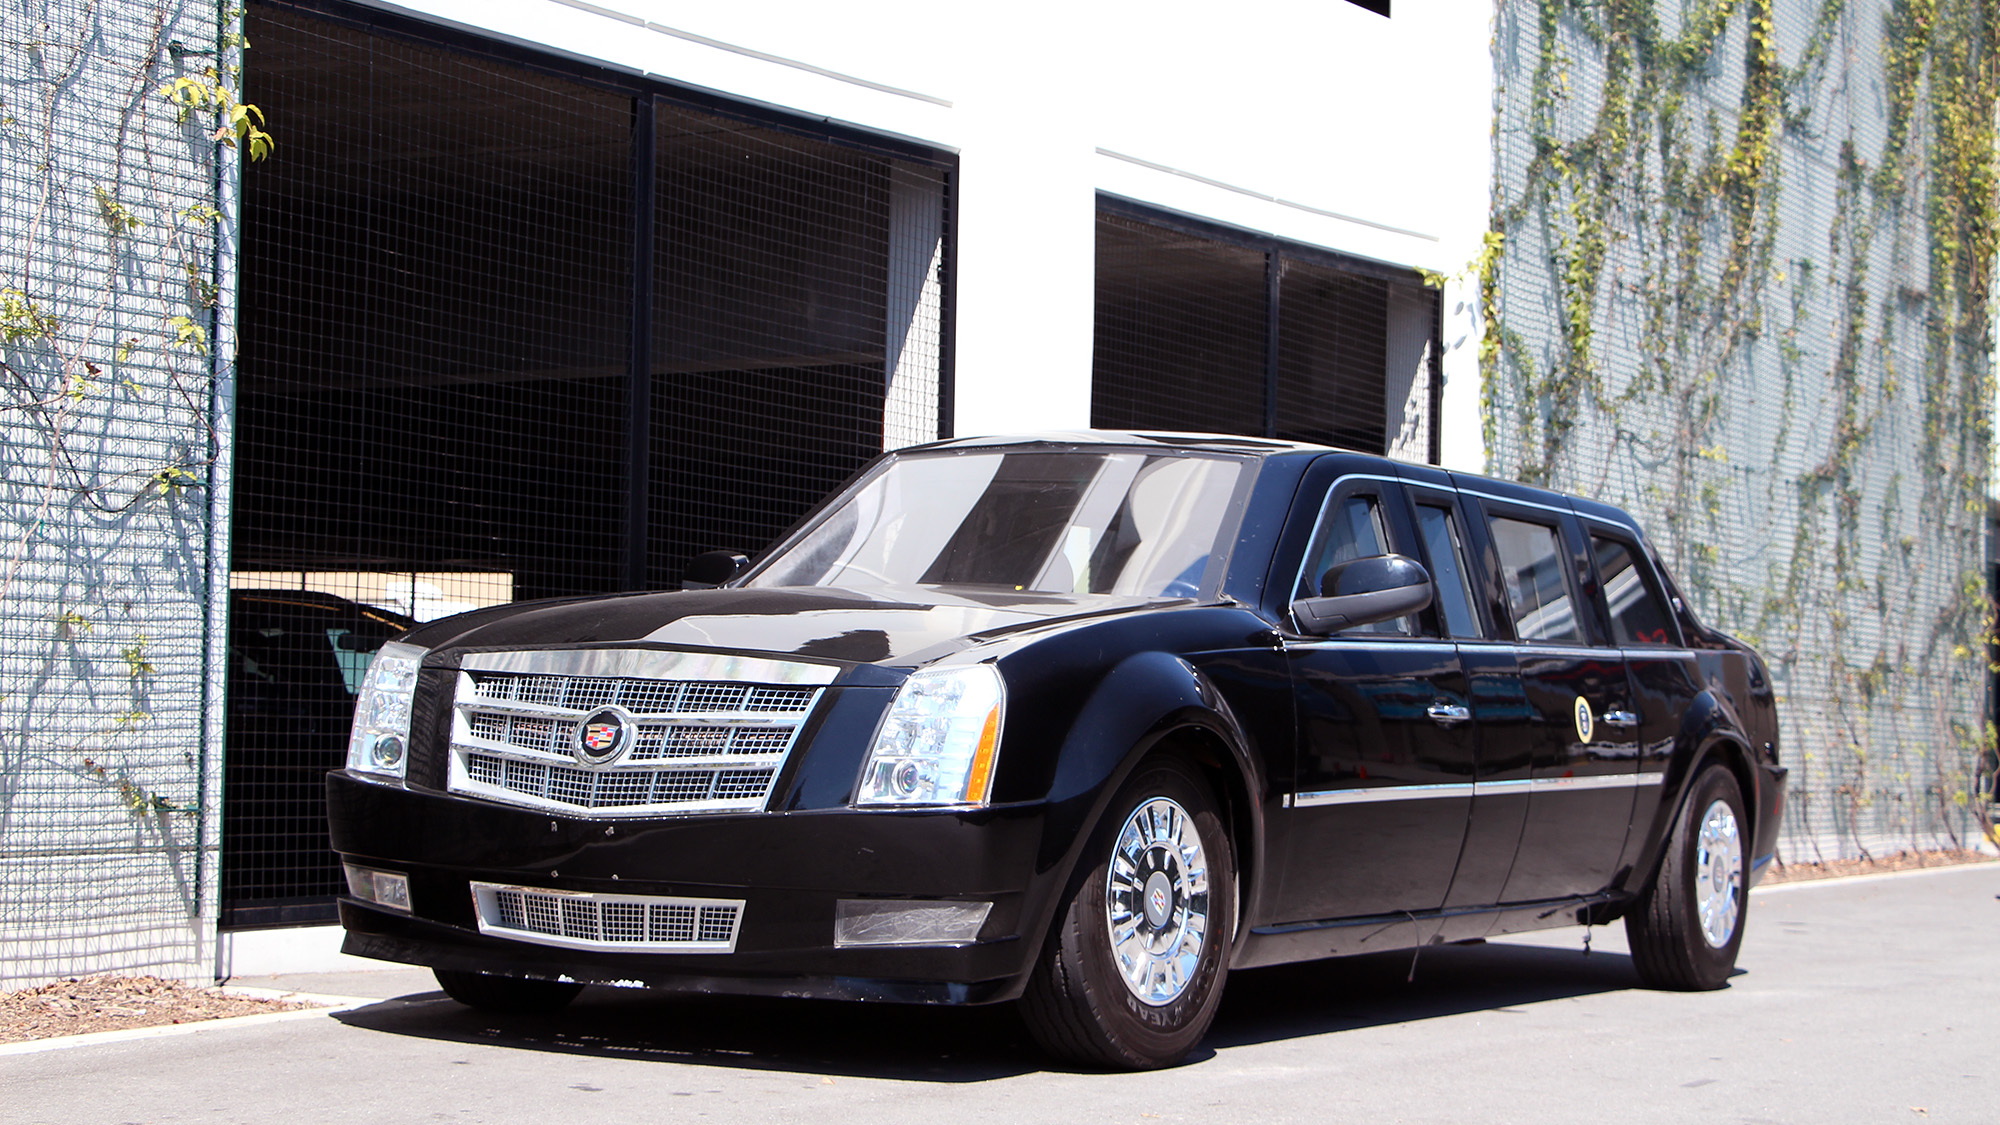 The Beast Presidential Limo from White House Down